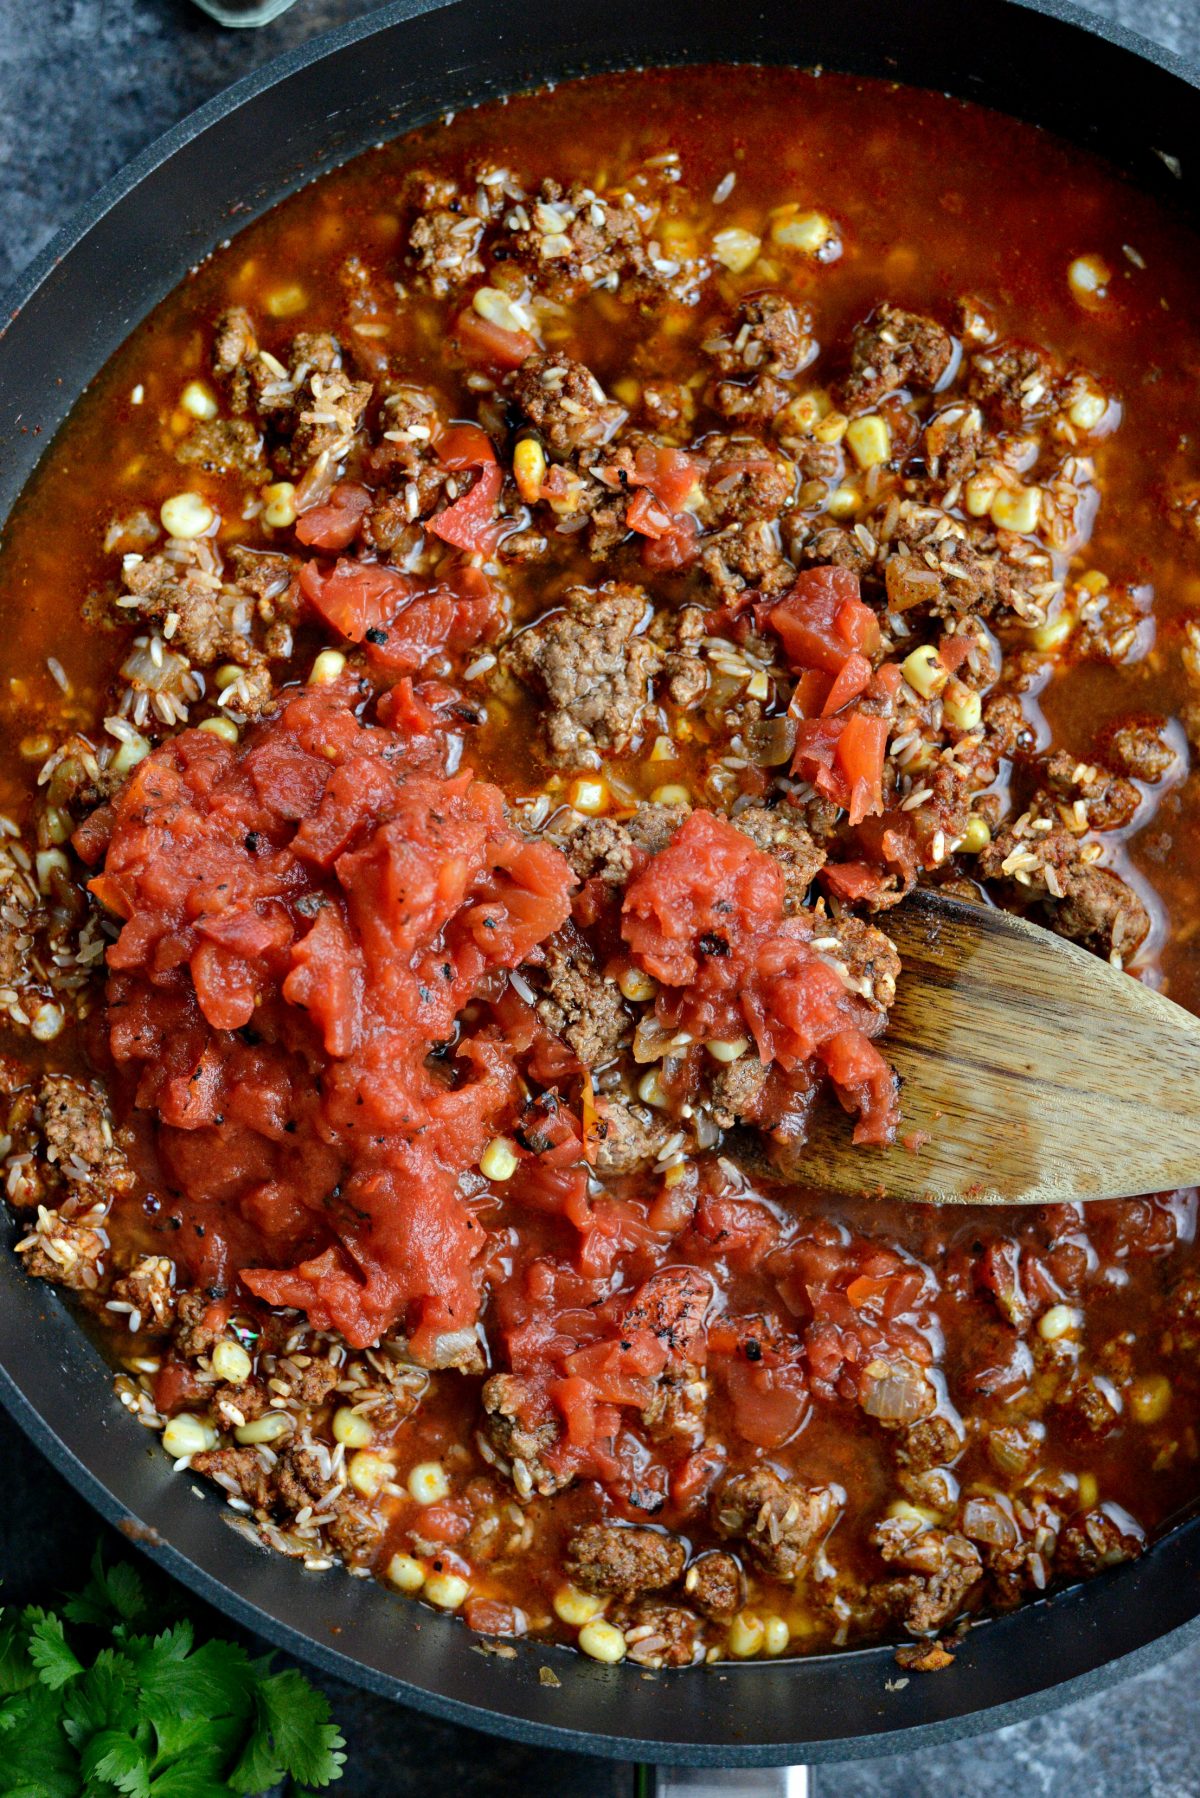 Add fire-roasted tomatoes and beef broth.